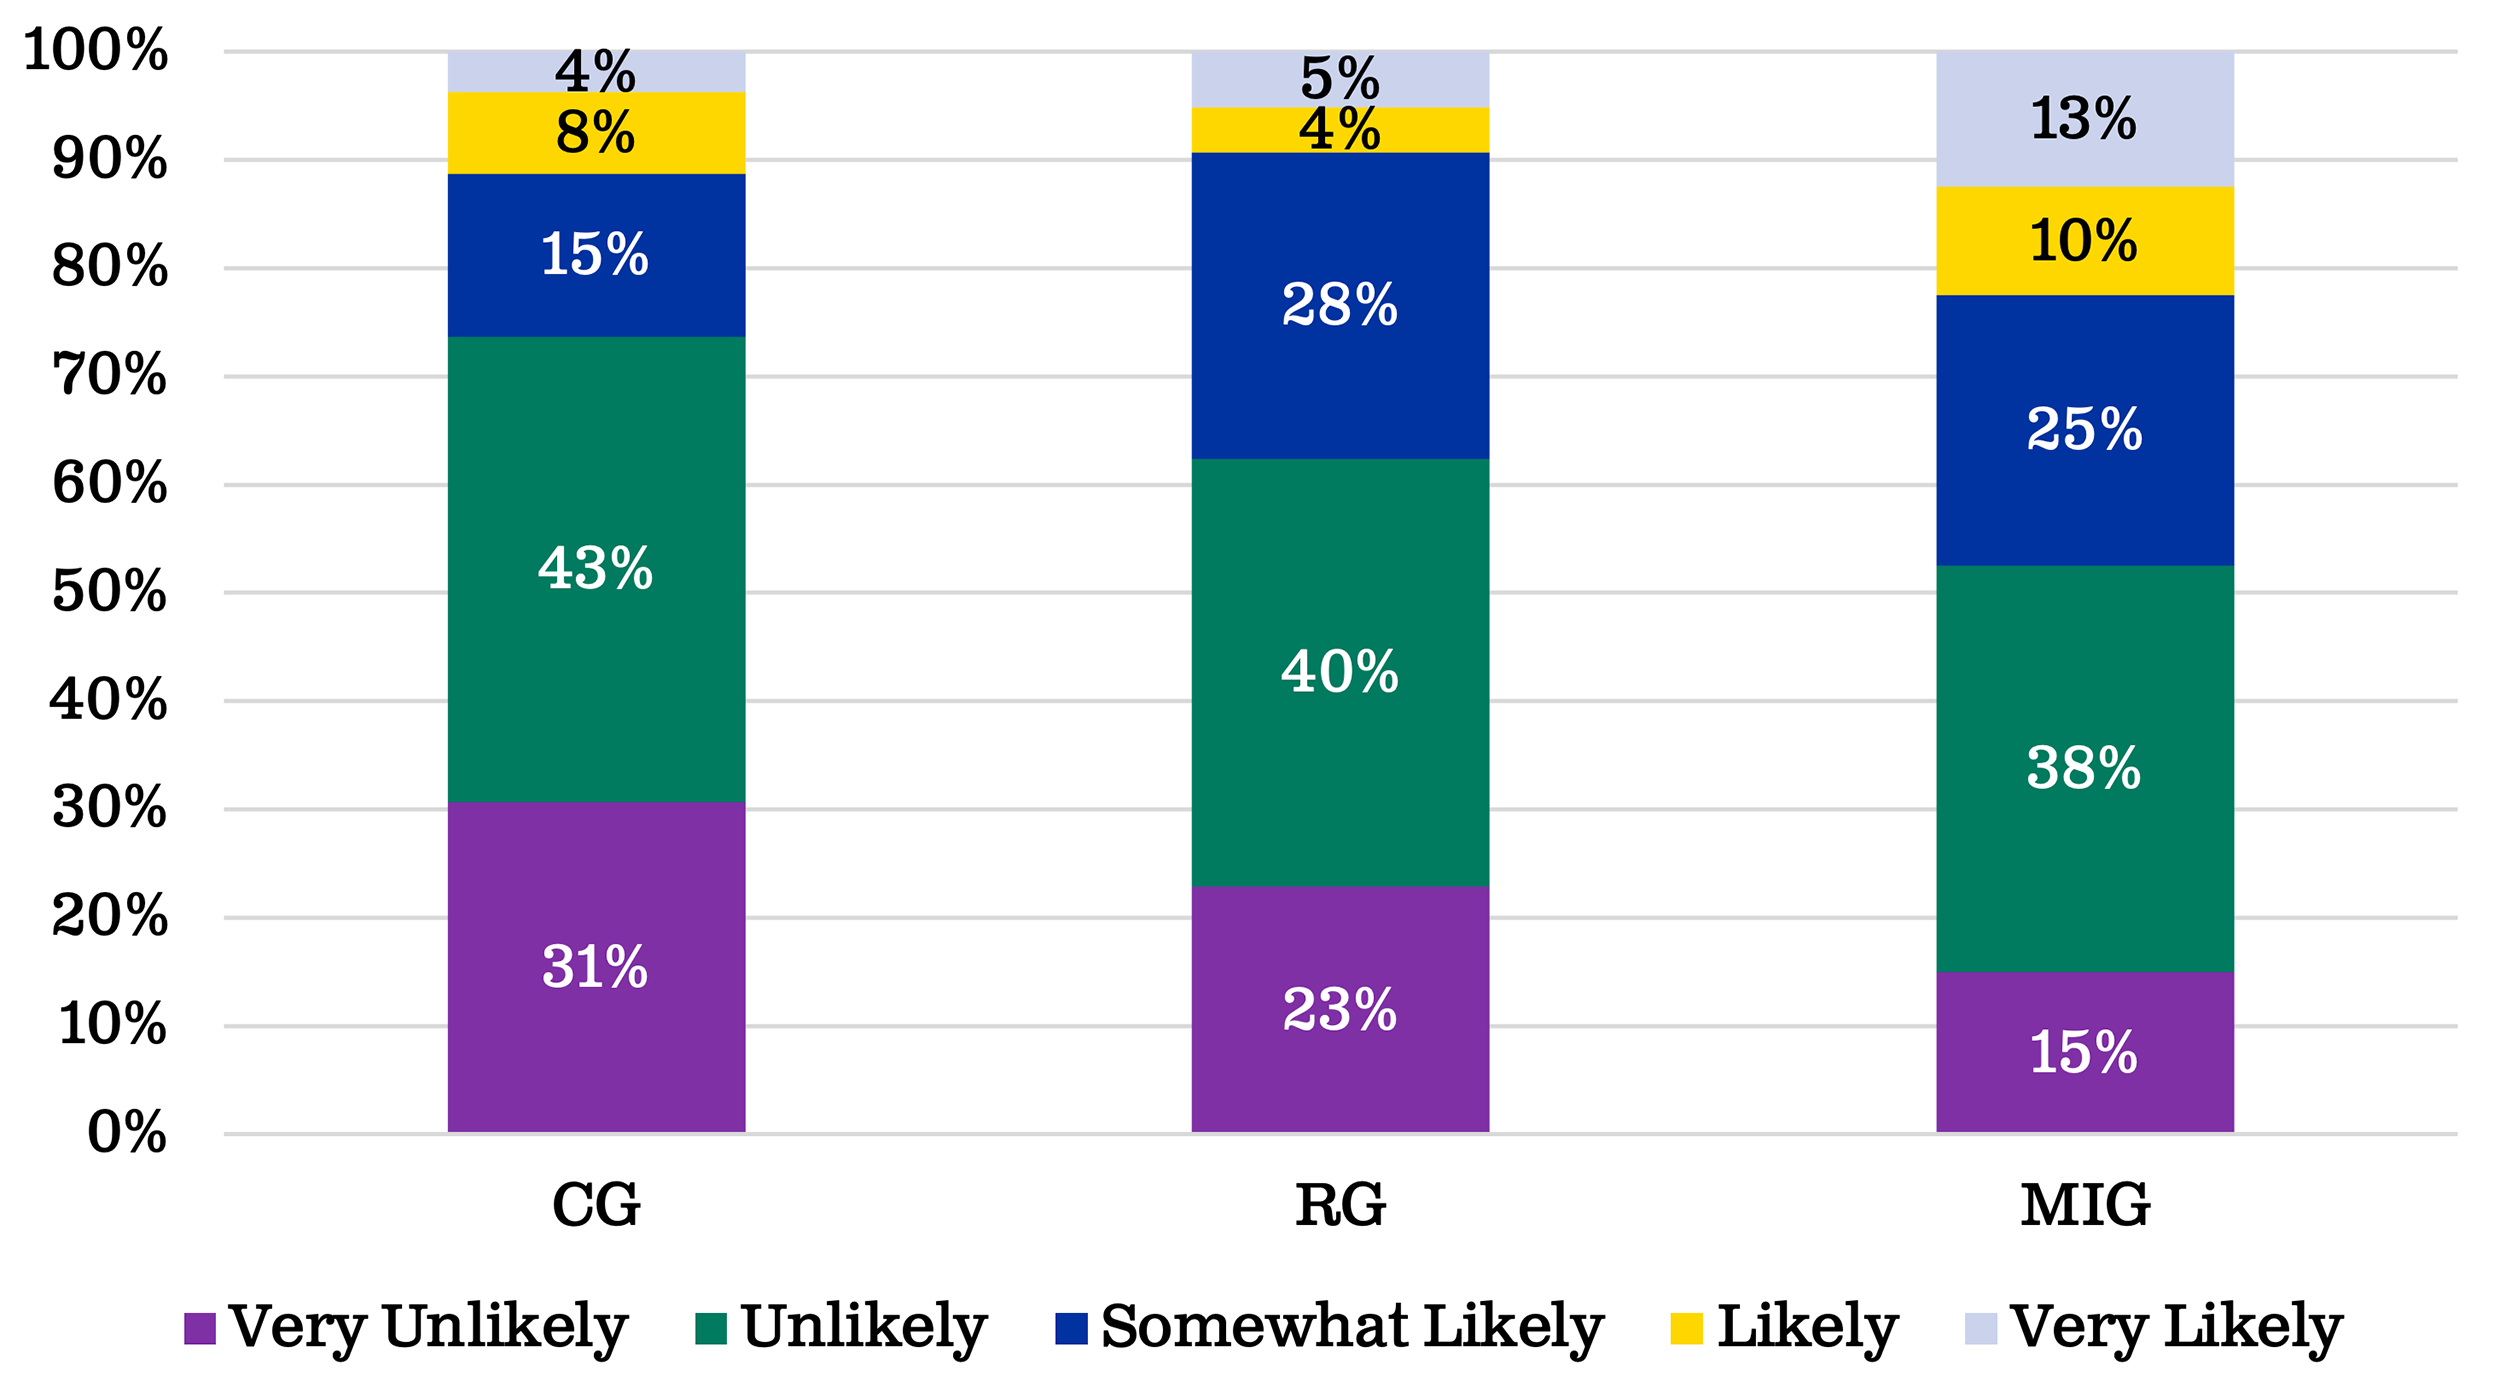 Bar graph illustrating the percentage of producer likelihood to convert croplands to grasslands in the next 10 years. For a complete description of this graphic and data set, please call SDSU Extension at 605-688-4792.